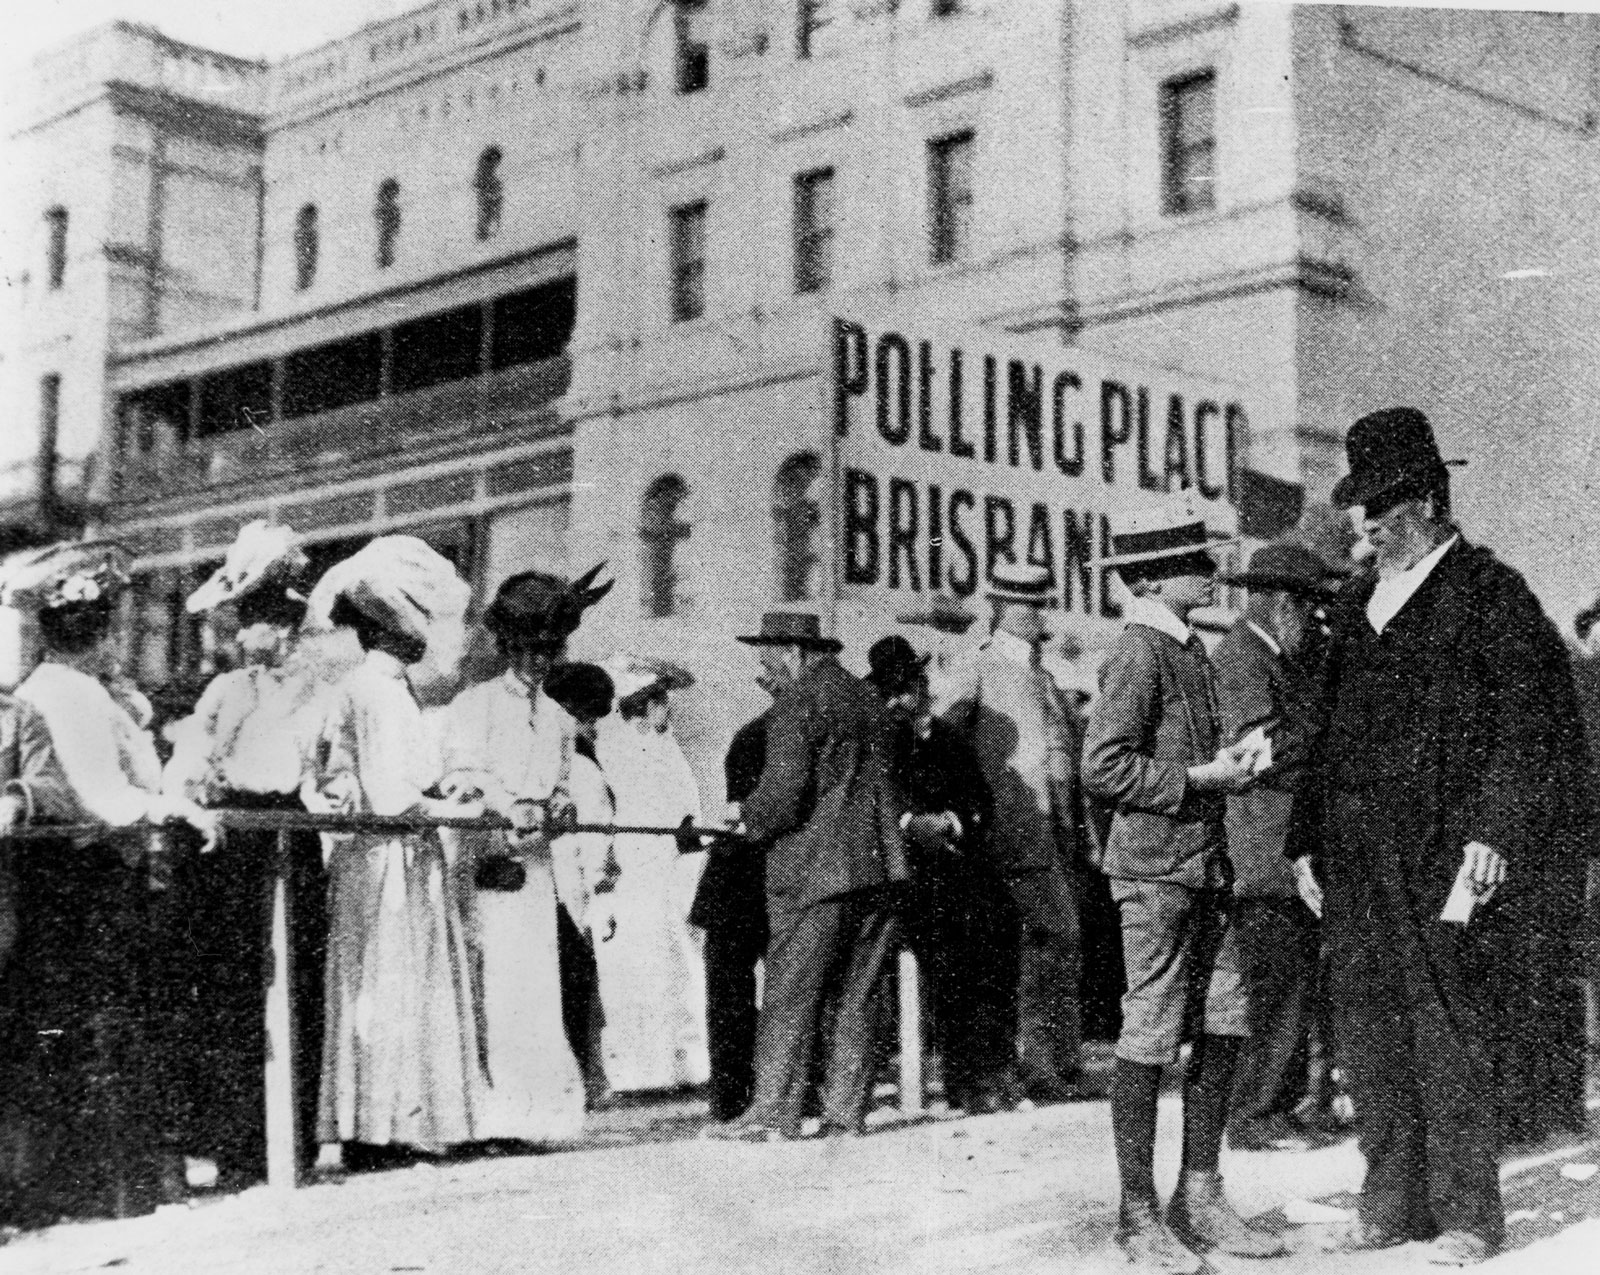 Voters outside a polling place, Brisbane, Queensland, 1907.